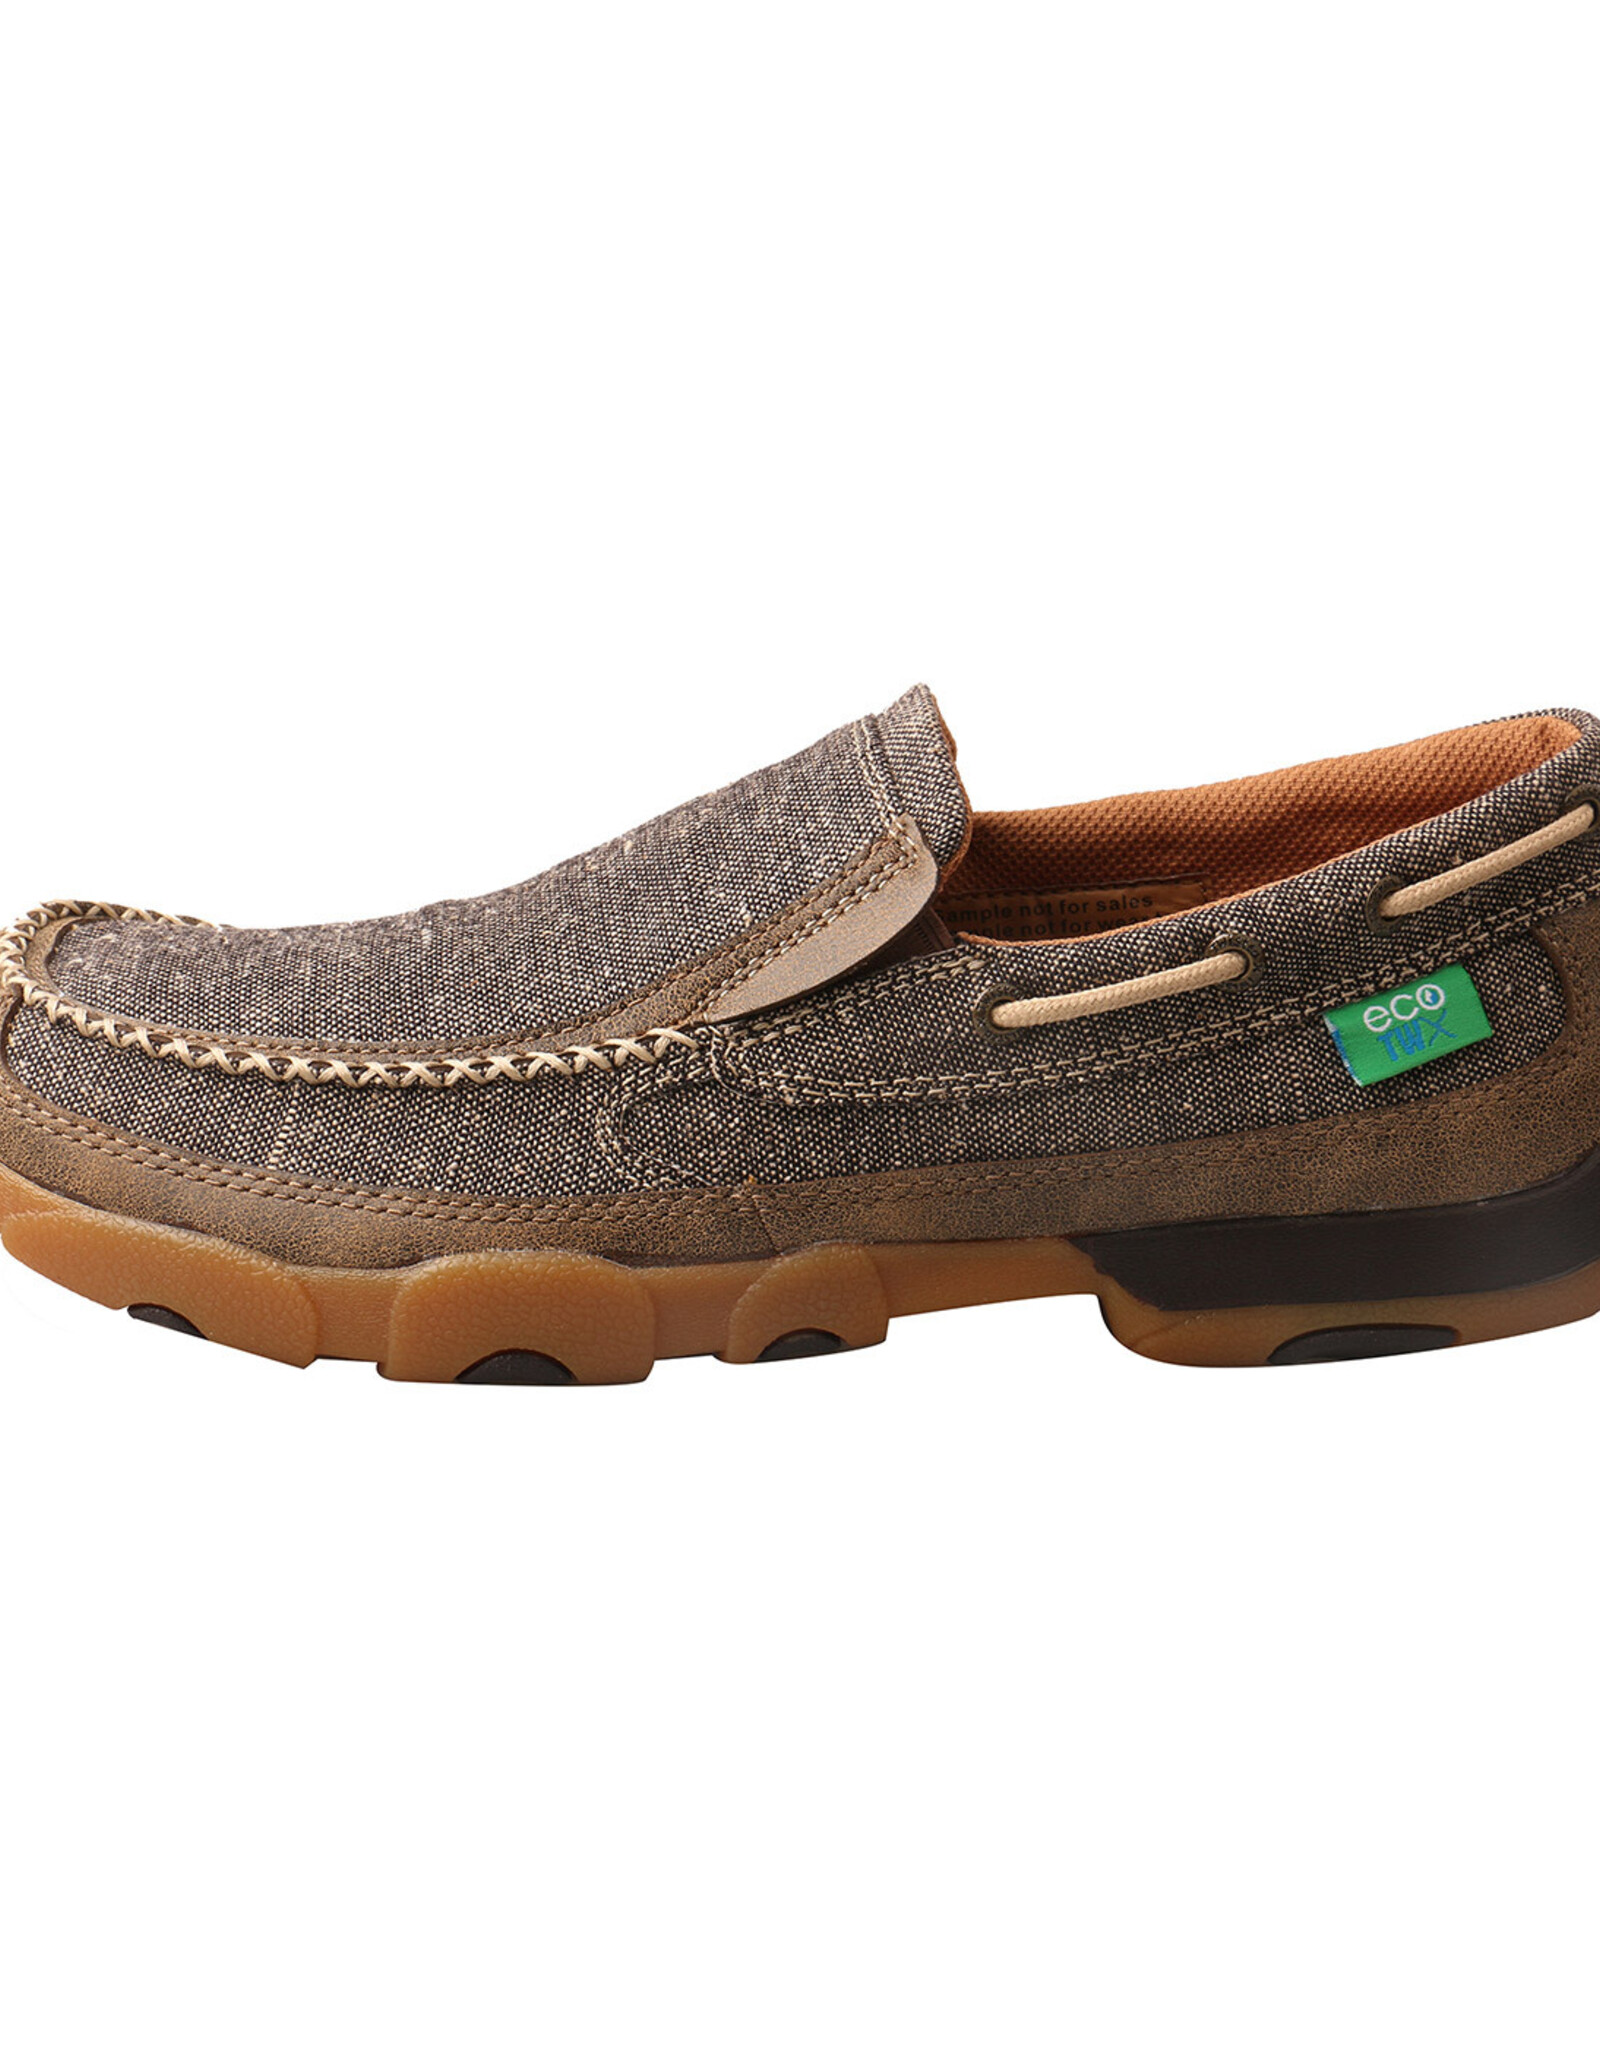 Twisted X Driving Mocs EcoTwx Slip On